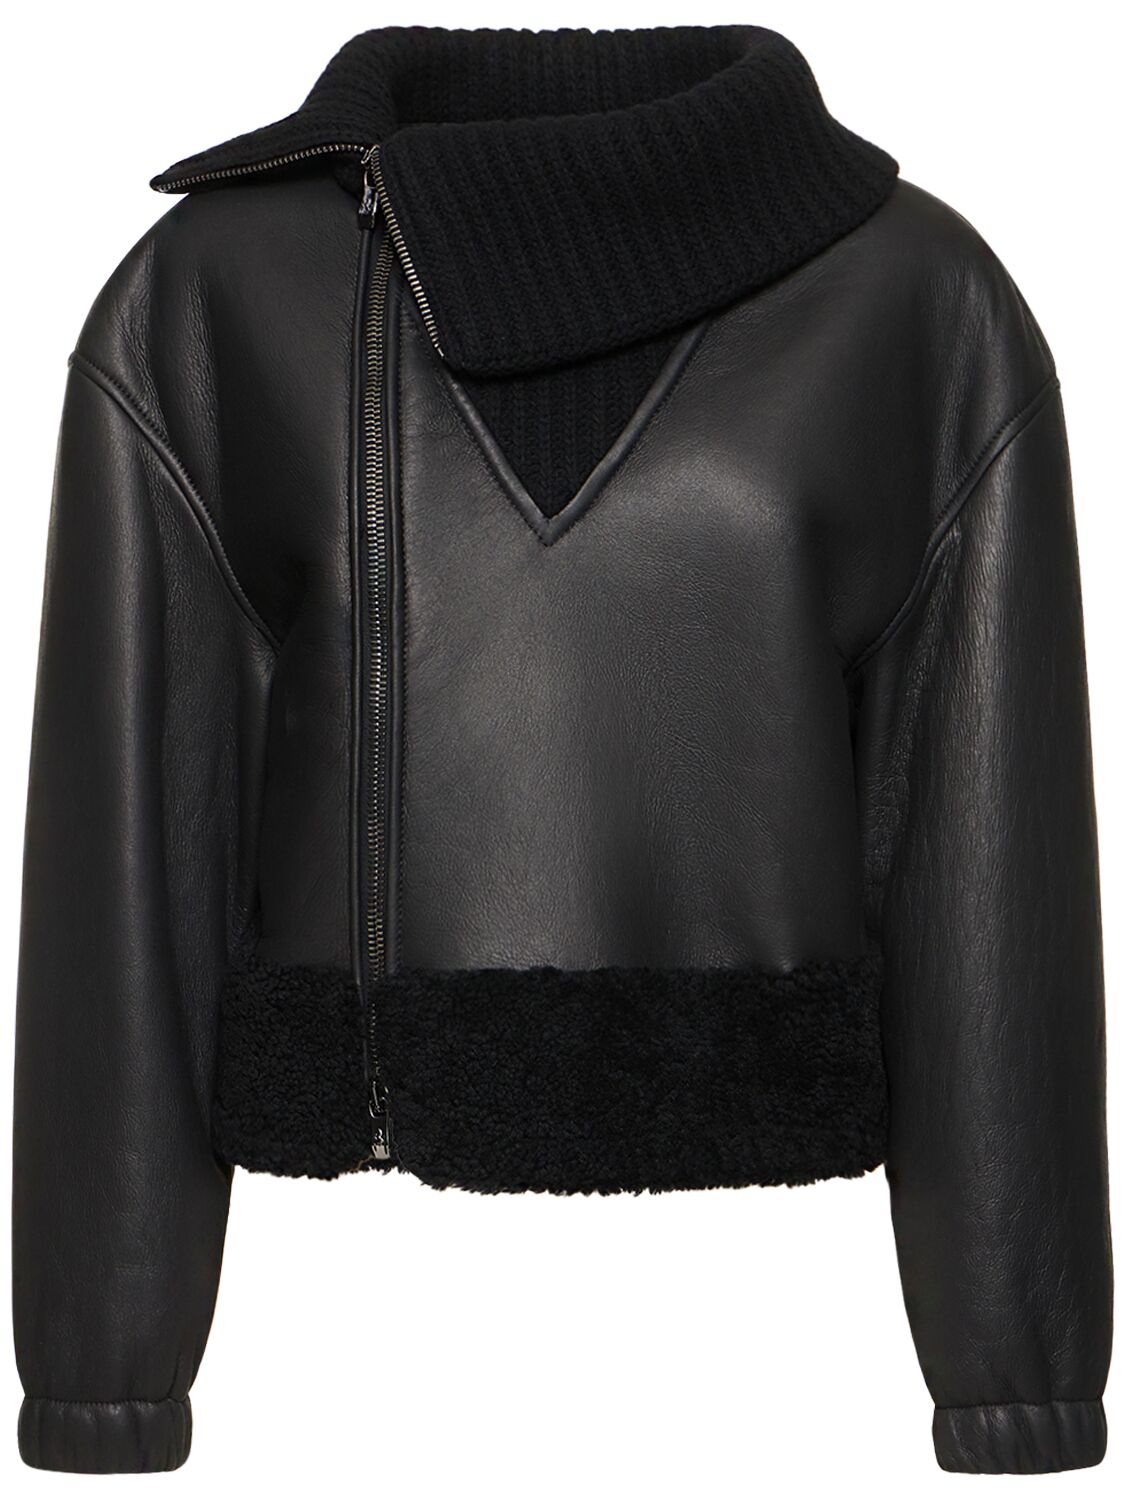 Leather Shearling Jacket W/ Collar